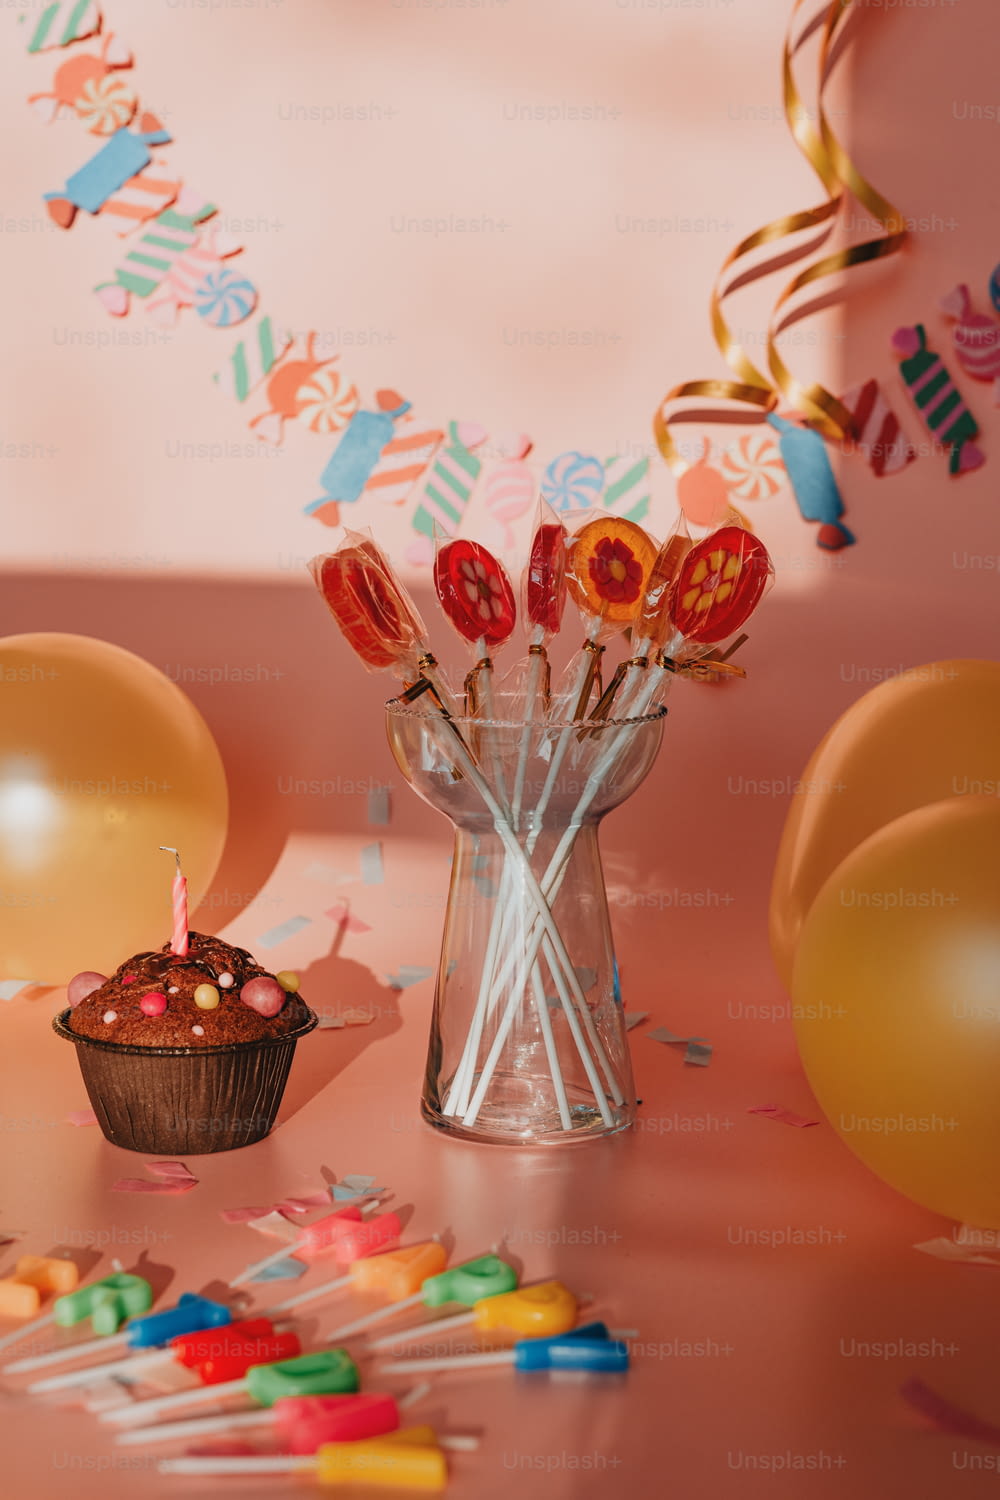 a cupcake on a table with balloons and confetti